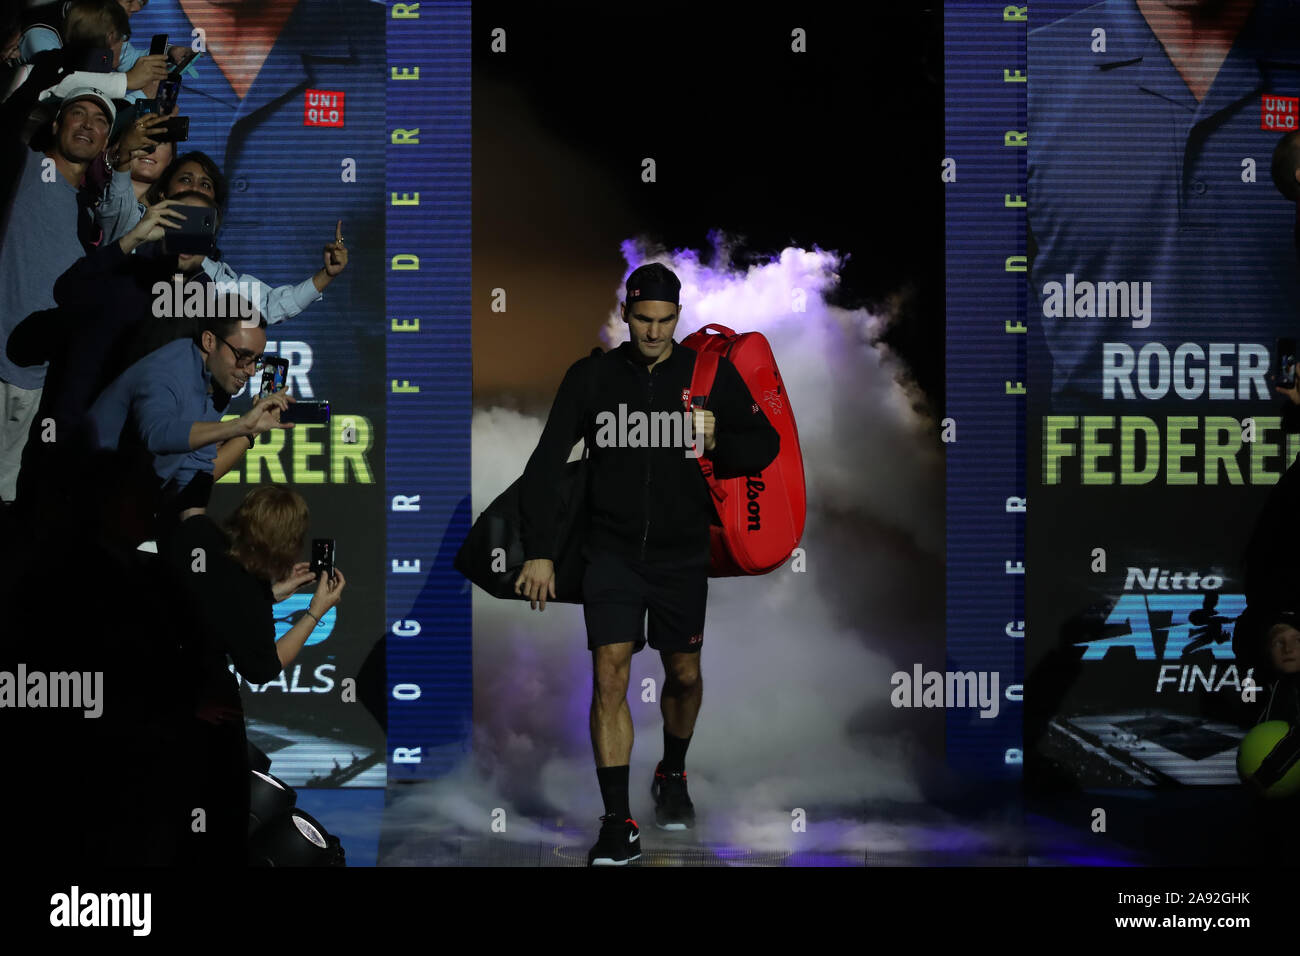 London, UK. 12th Nov, 2019. Arena. London, UK. 12th Nov, 2019. Nitto ATP Tennis Finals; Roger Federer (Switzerland) enters the arena - Editorial Use Credit: Action Plus Sports/Alamy Live News Credit: Action Plus Sports Images/Alamy Live News Stock Photo